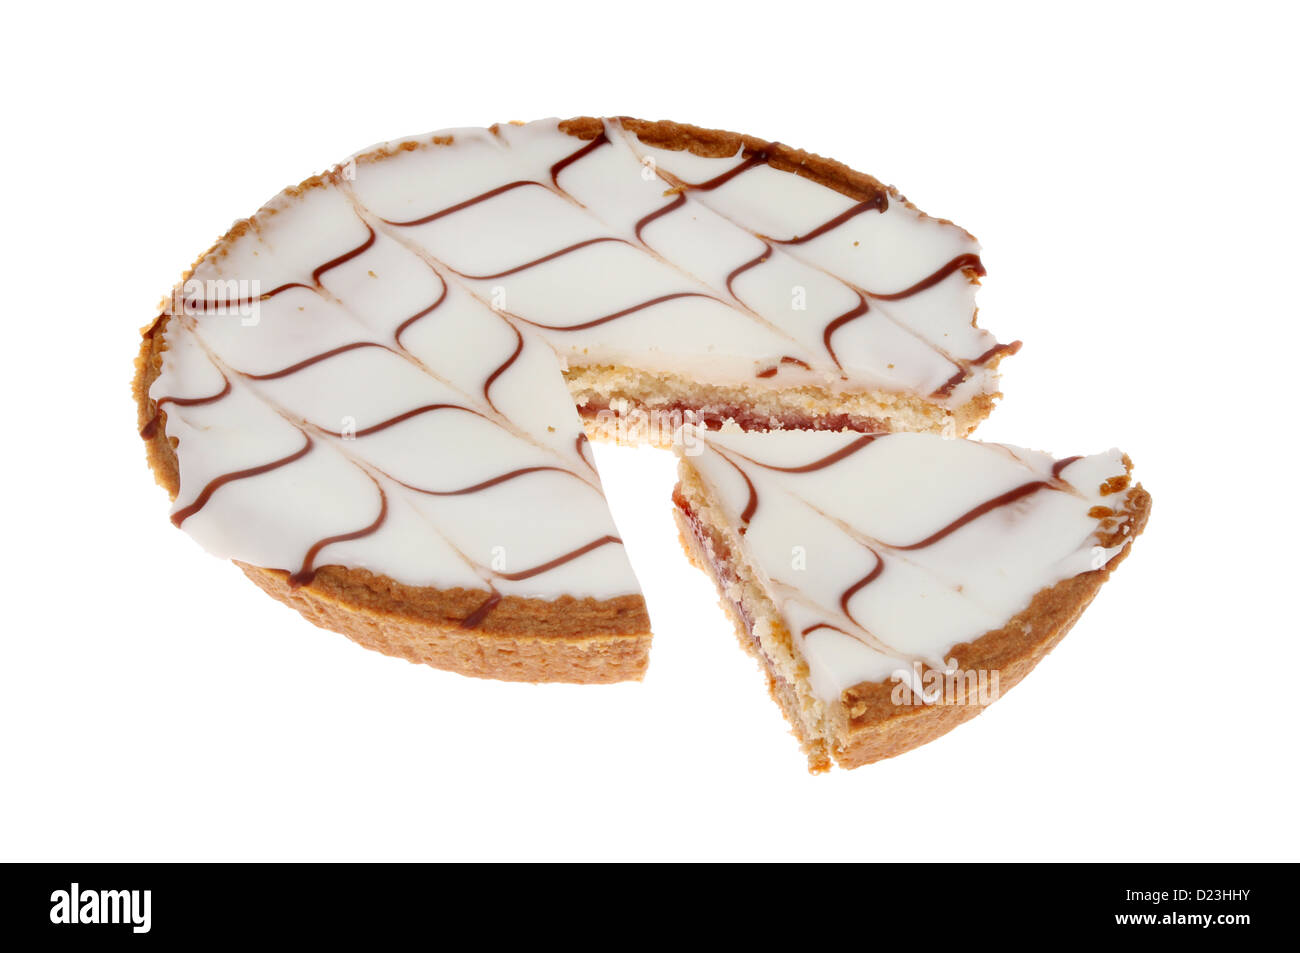 Bakewell pie chart, iced bakewell tart with a section cut out isolated against white Stock Photo